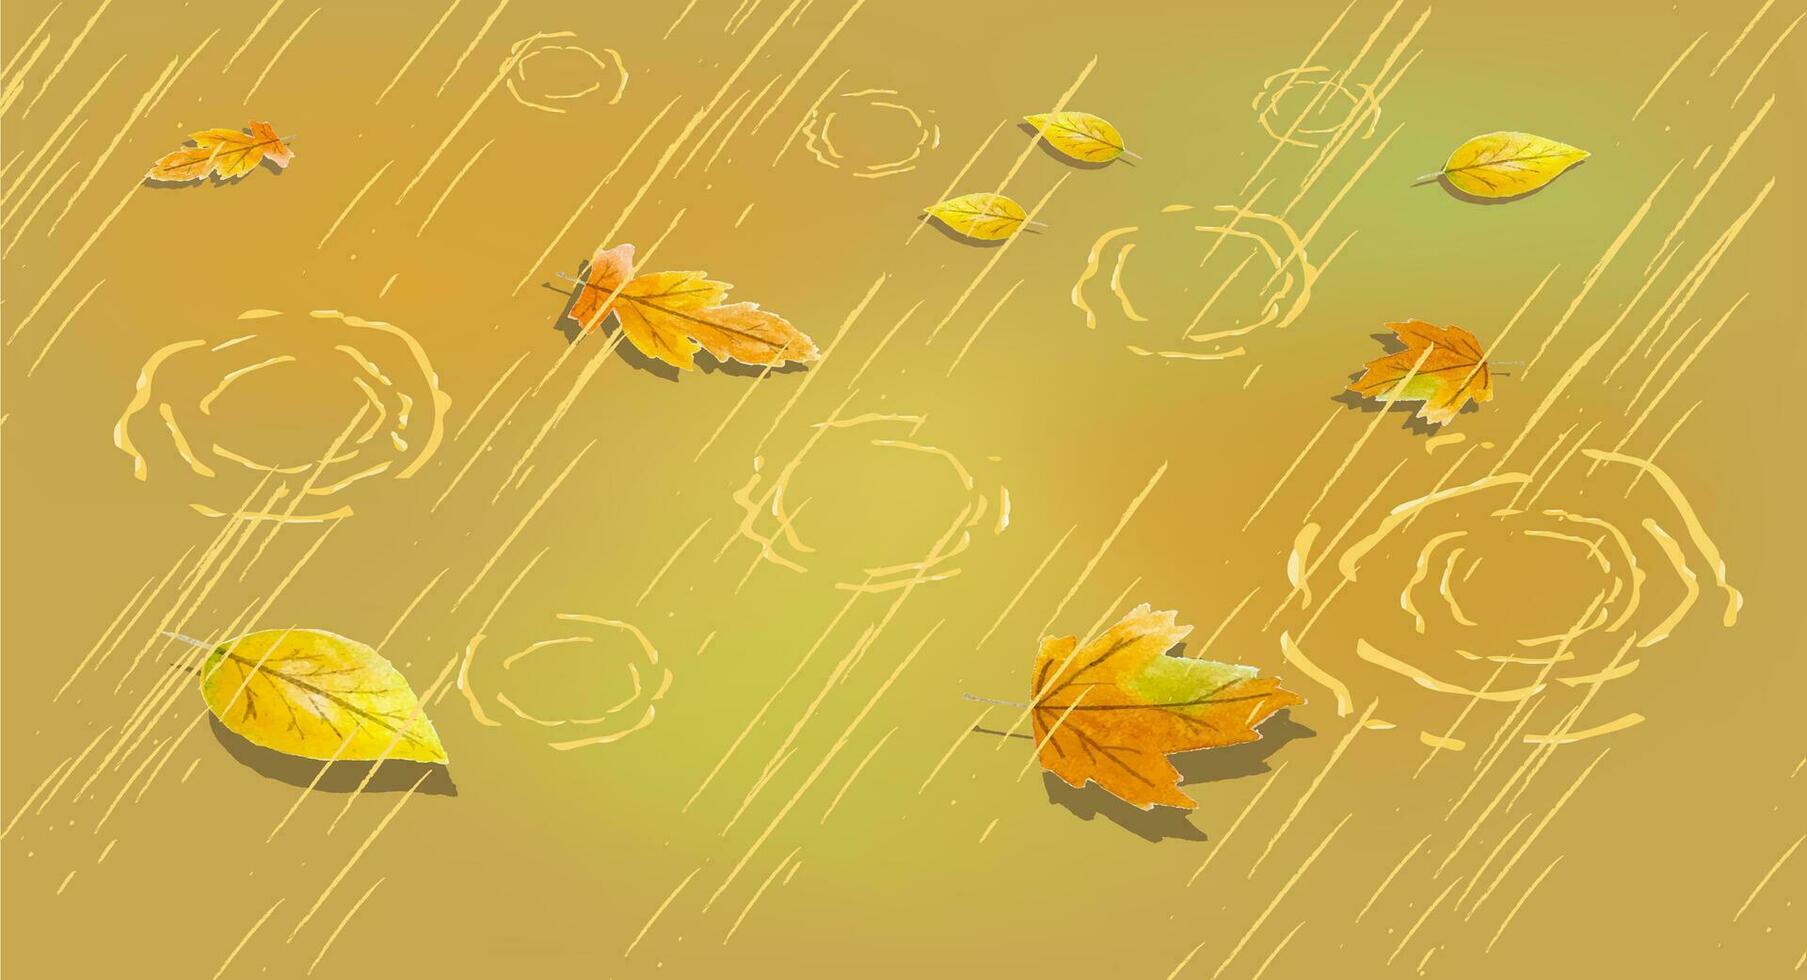 Autumn puddle drops Rain Leaves. Beautiful wallpapers for Banners, Posters on the autumn theme. Atmospheric nature vector